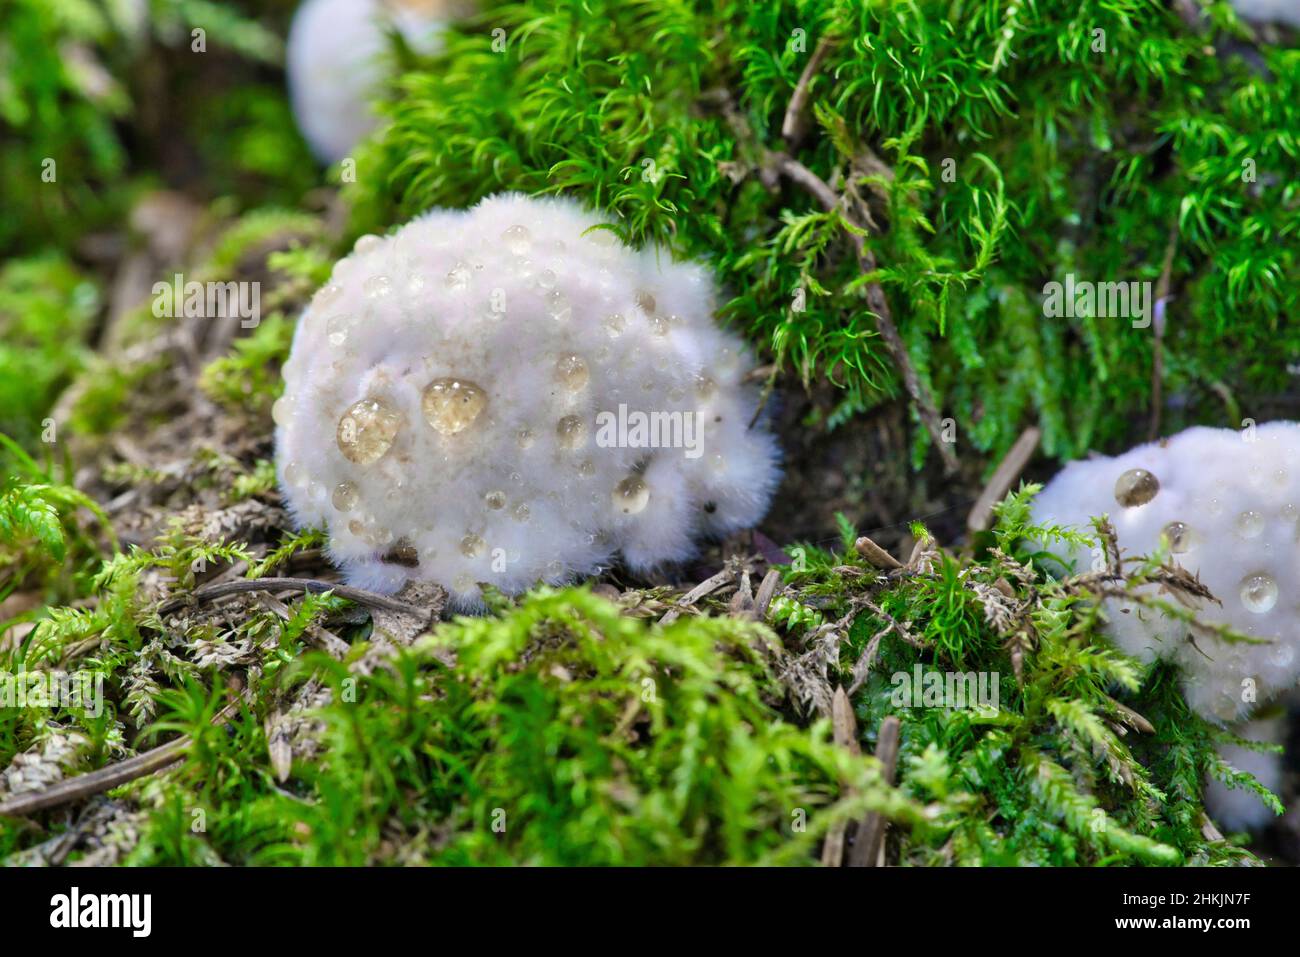 A Postia ptychogaster, known as the powderpuff bracket, strange fungus from Sweden Stock Photo